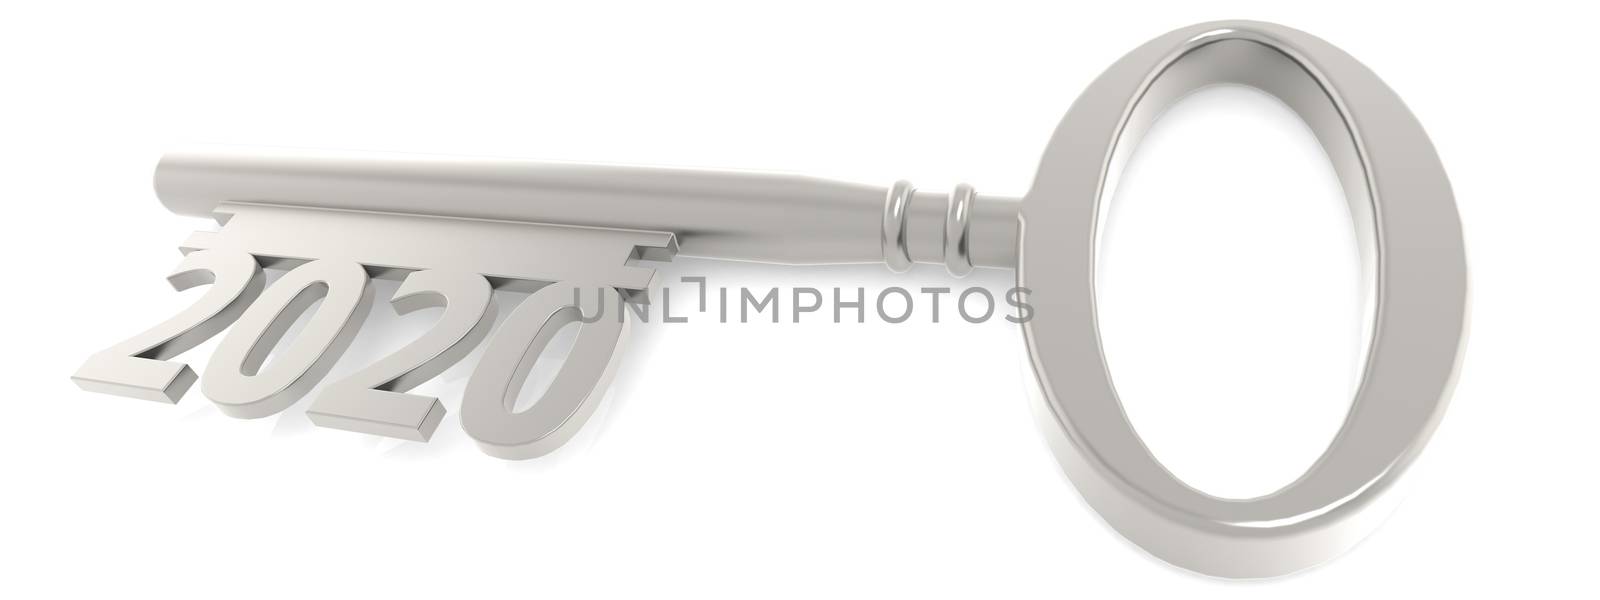 Vintage Key with 2020 year Sign on a white background, 3D rendering